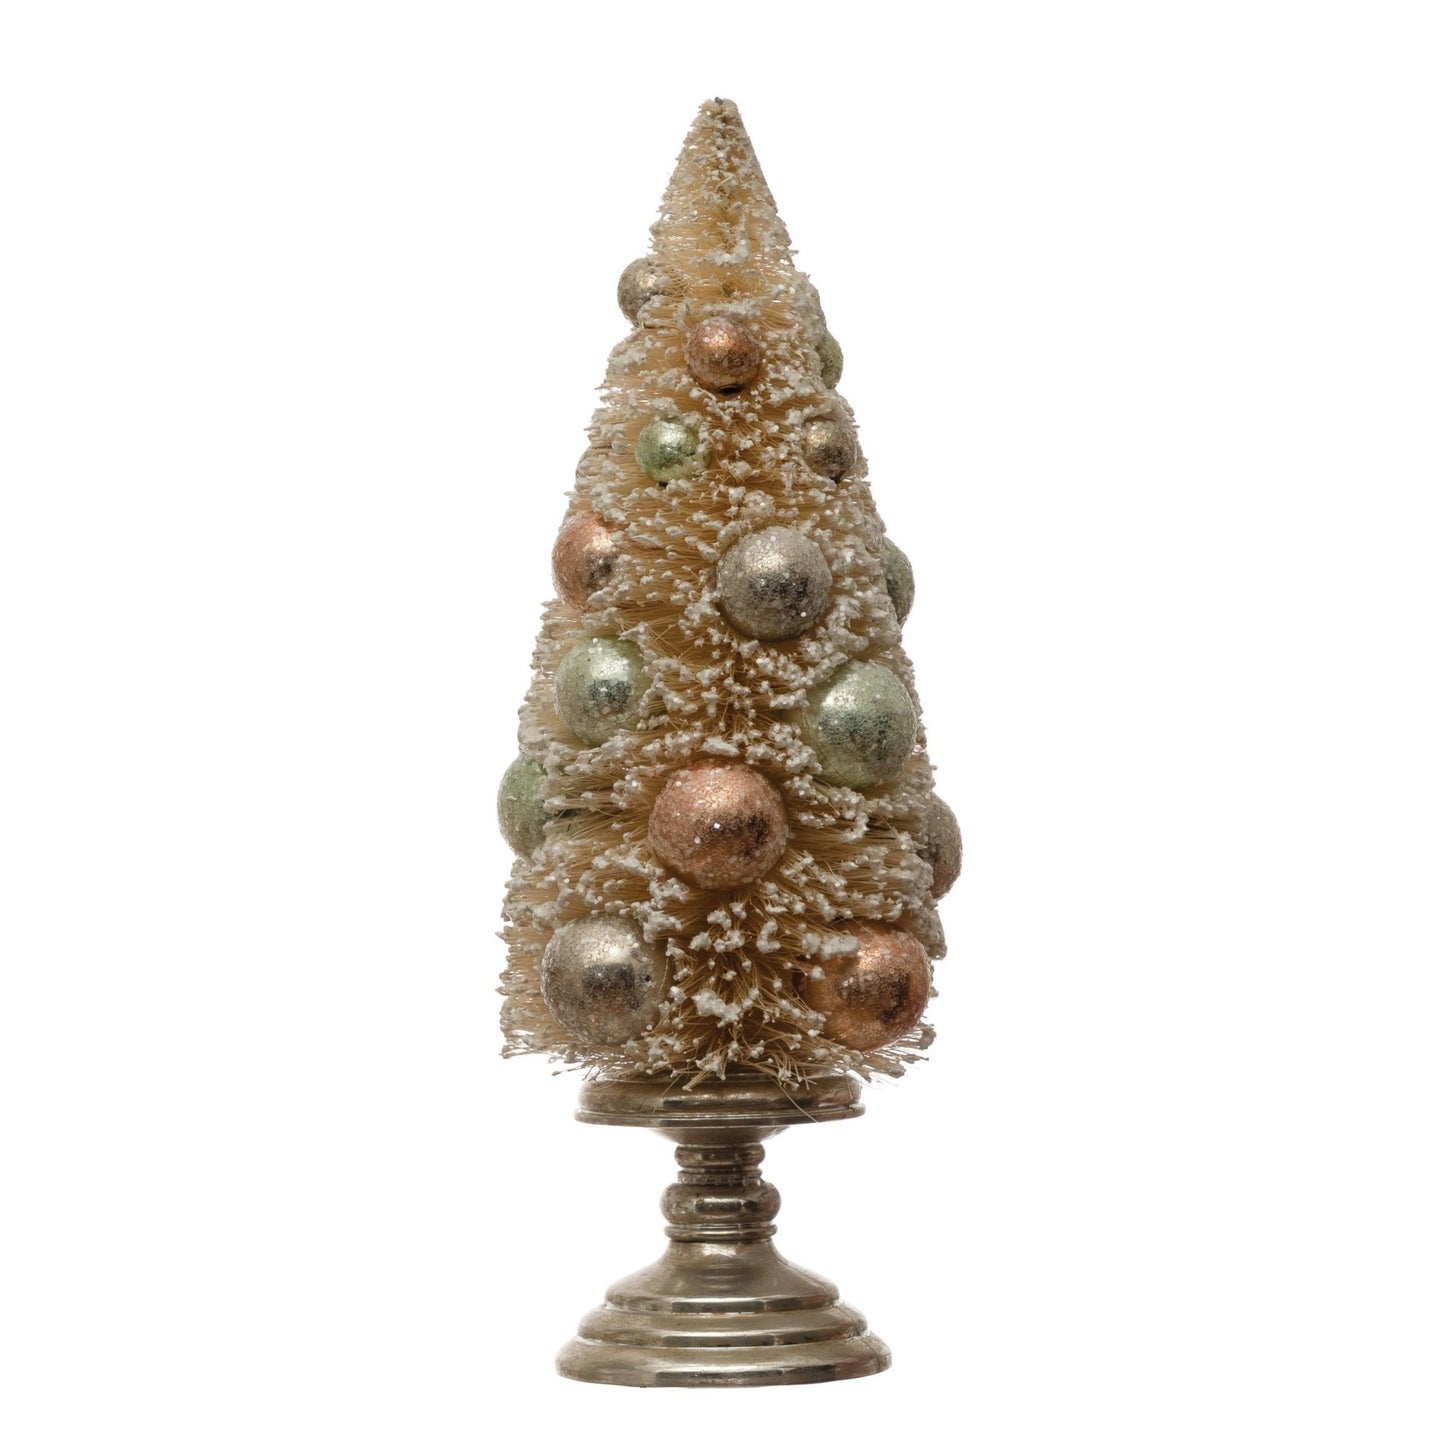 Bottle Brush Tree with Ornaments on Glass Pedestal - Royalties